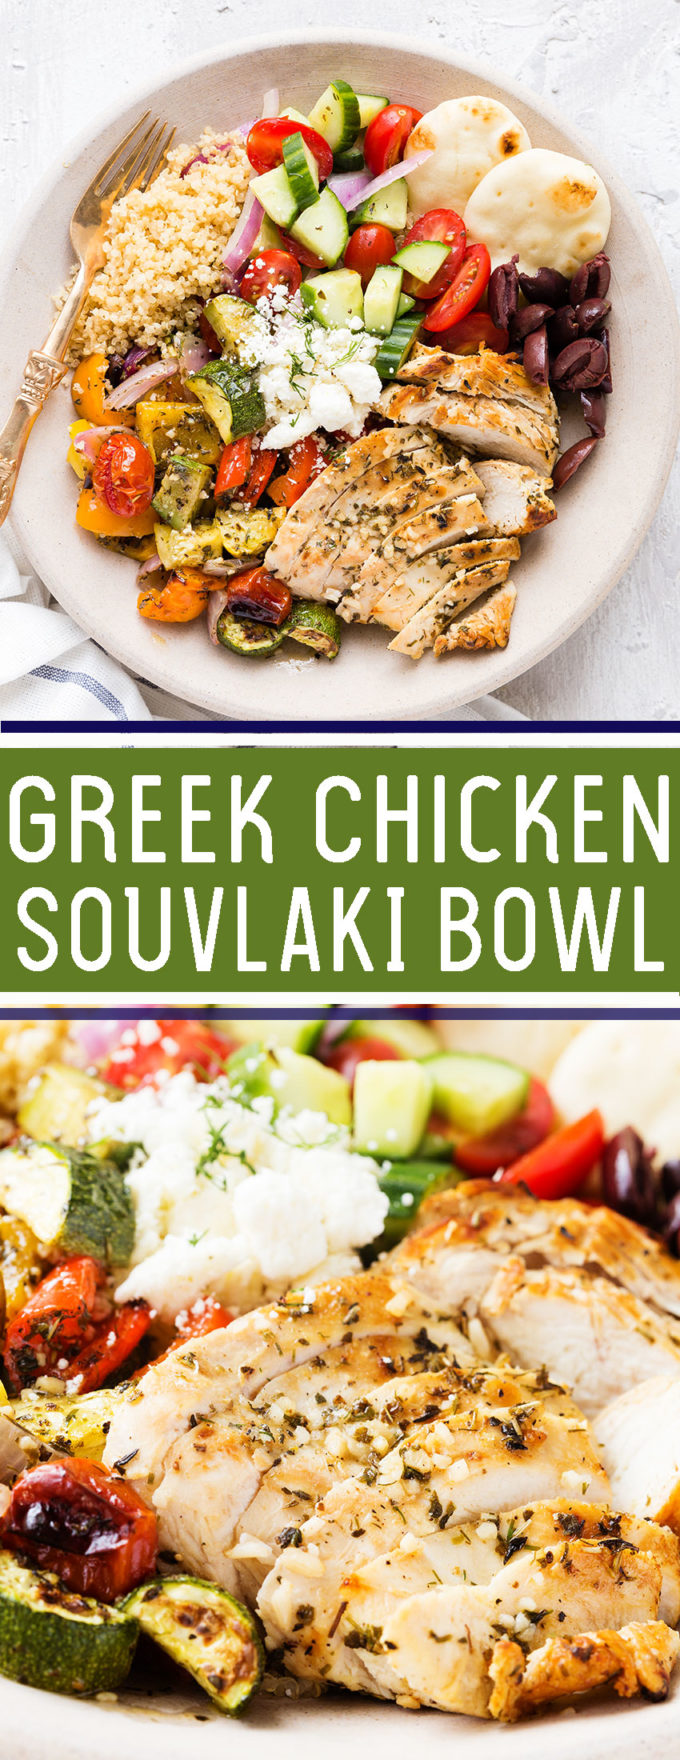 Greek Chicken Souvlaki Bowl: Grilled chicken and roasted vegetables served over quinoa with a fresh cucumber salad, Kalmata olives, and feta, garnished with fresh dill